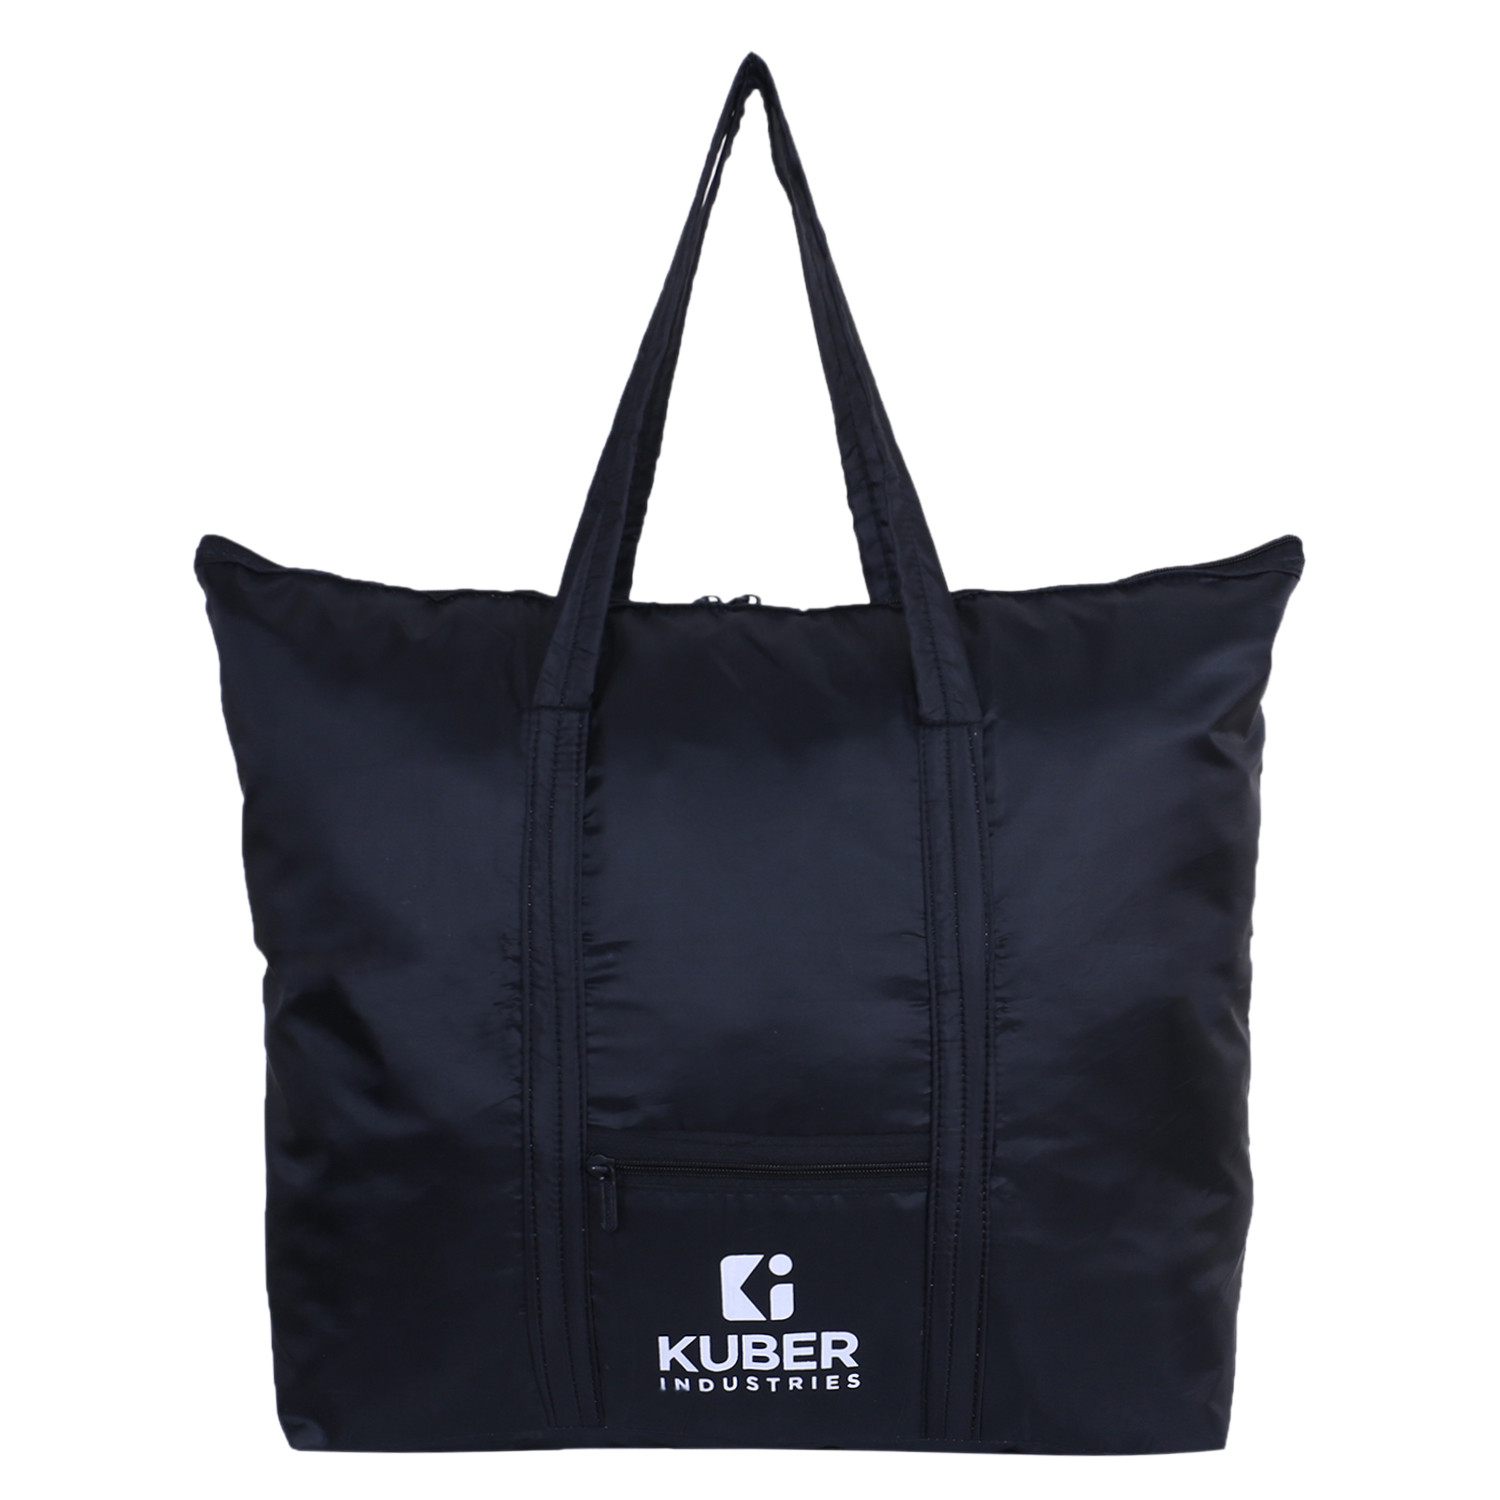 Kuber Industries Shopping Bag|Folding Travel Bag|Polyester Shopping Bag for Grocery|Carrying Bag With Front Small Pocket (Black)